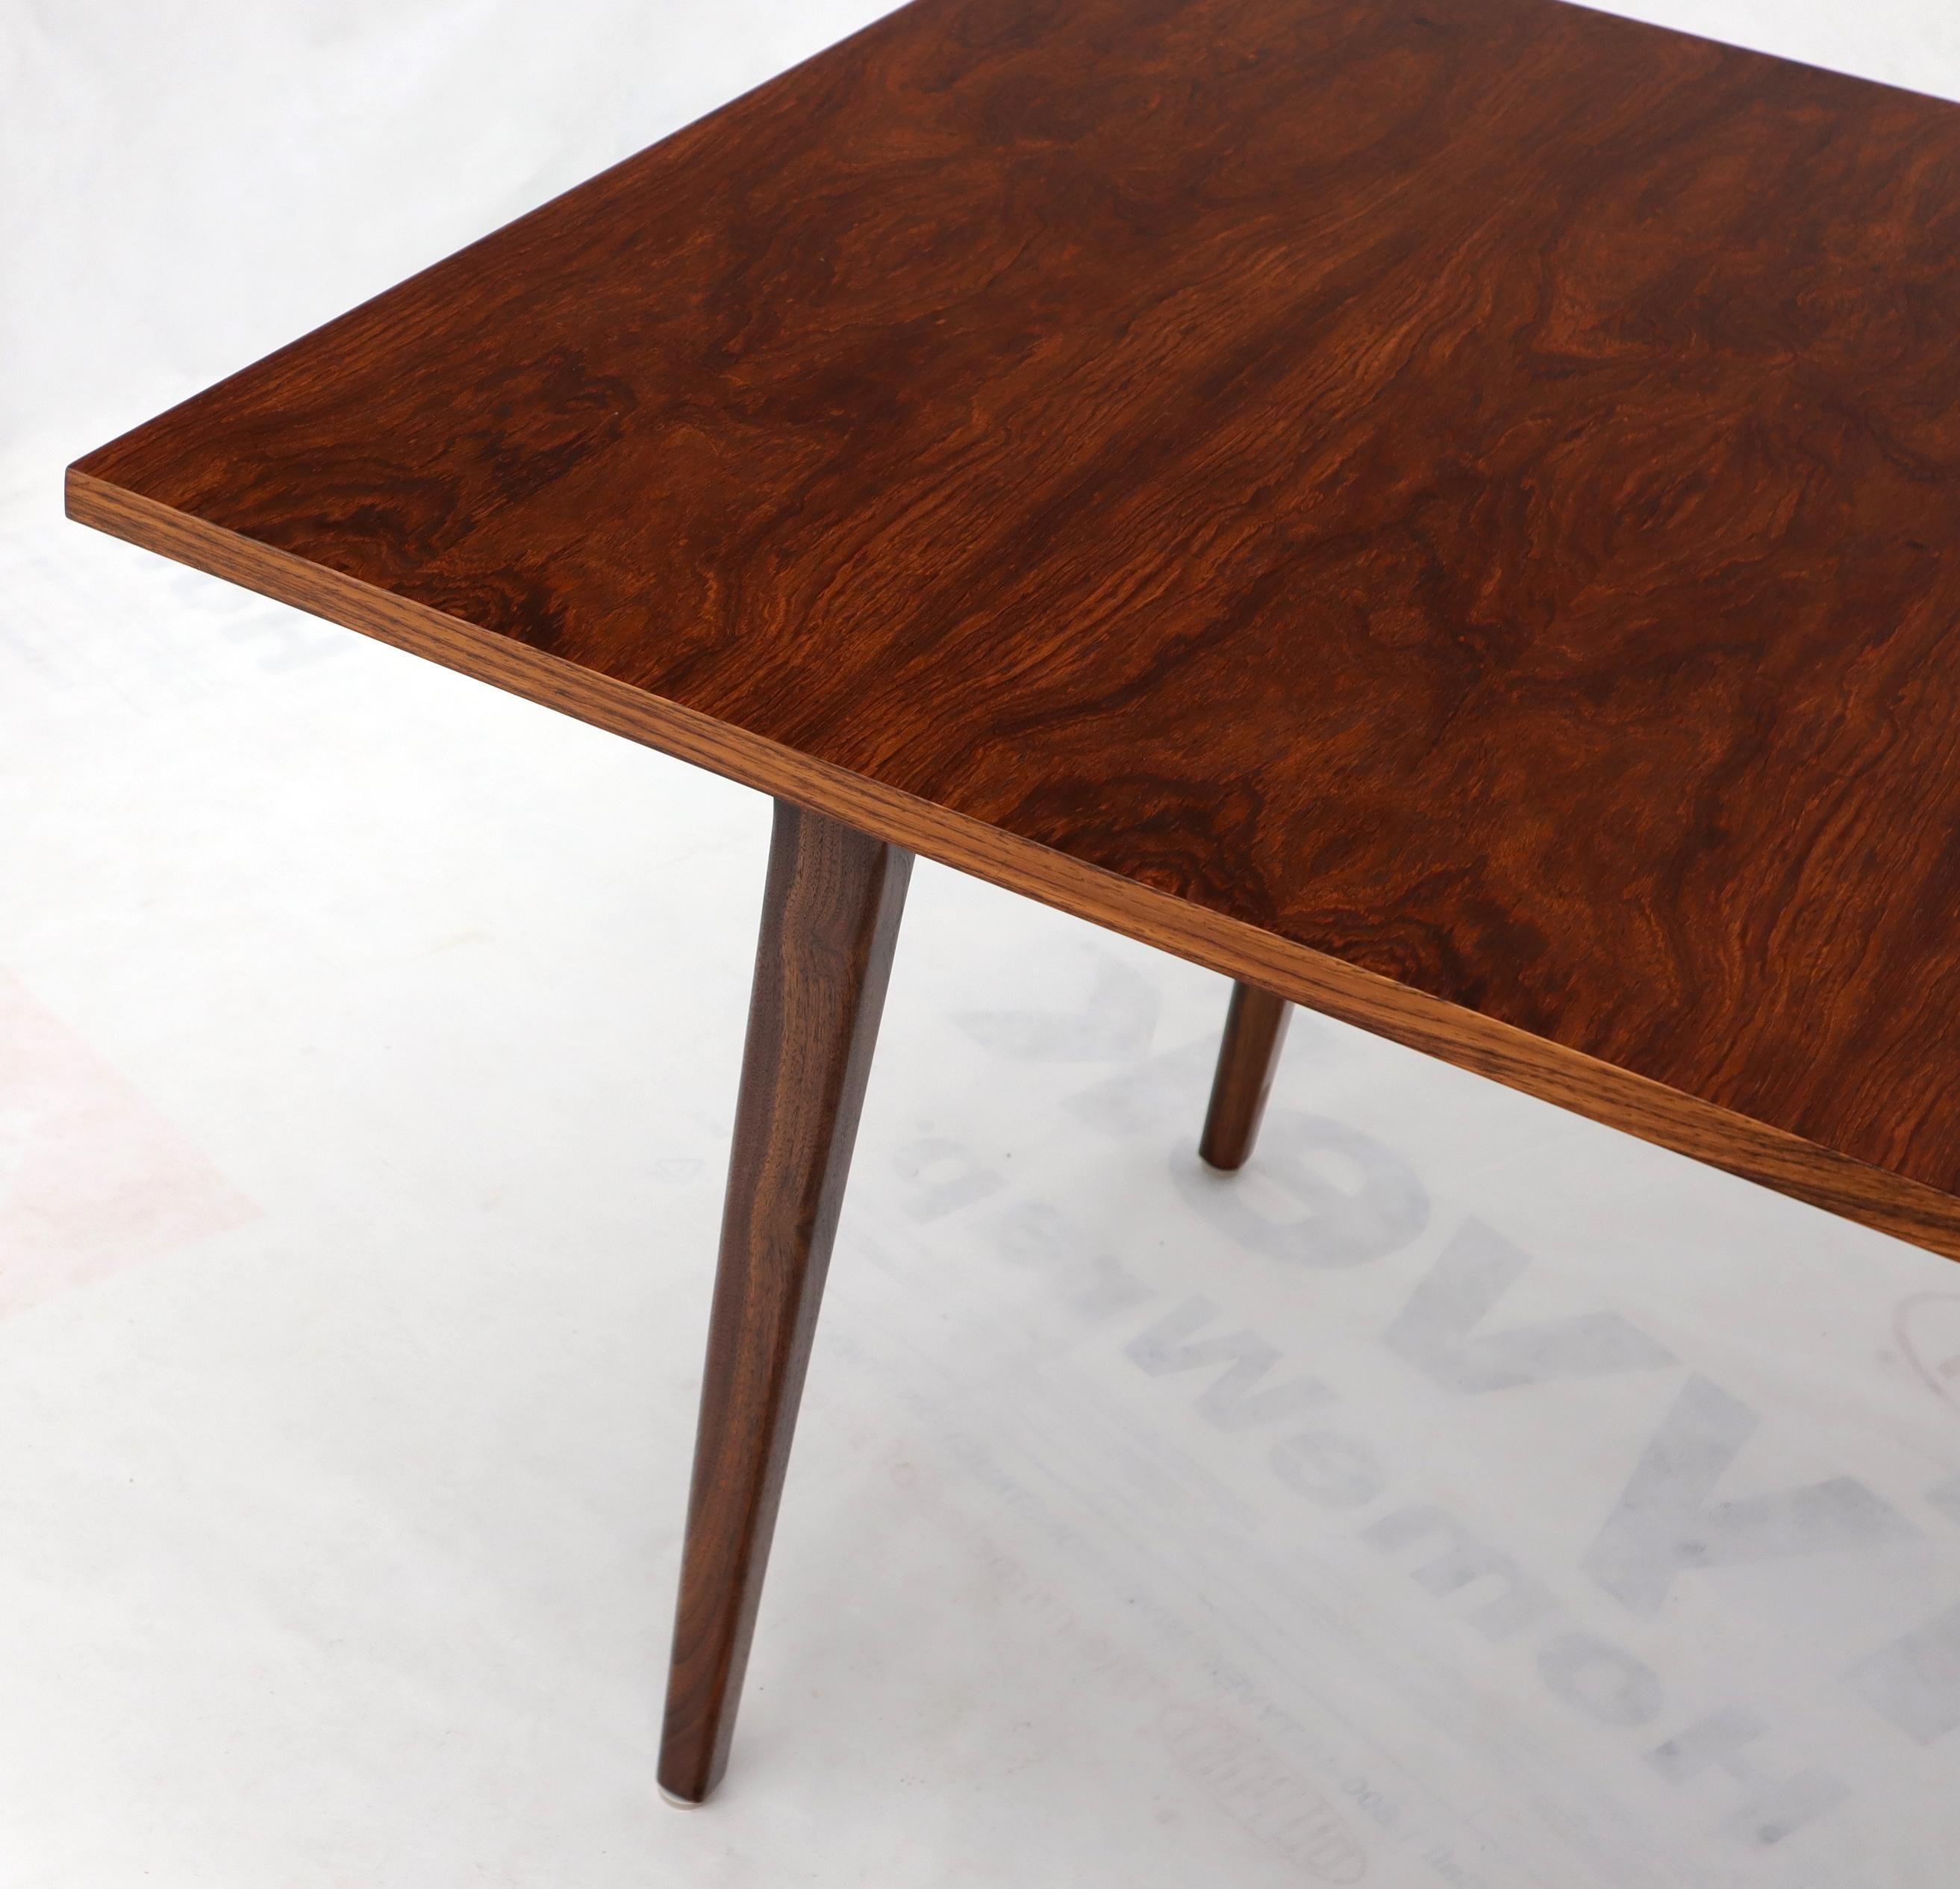 Rosewood Rectangular Dining Table by George Nelson for Herman Miller 2 Leaves In Excellent Condition For Sale In Rockaway, NJ